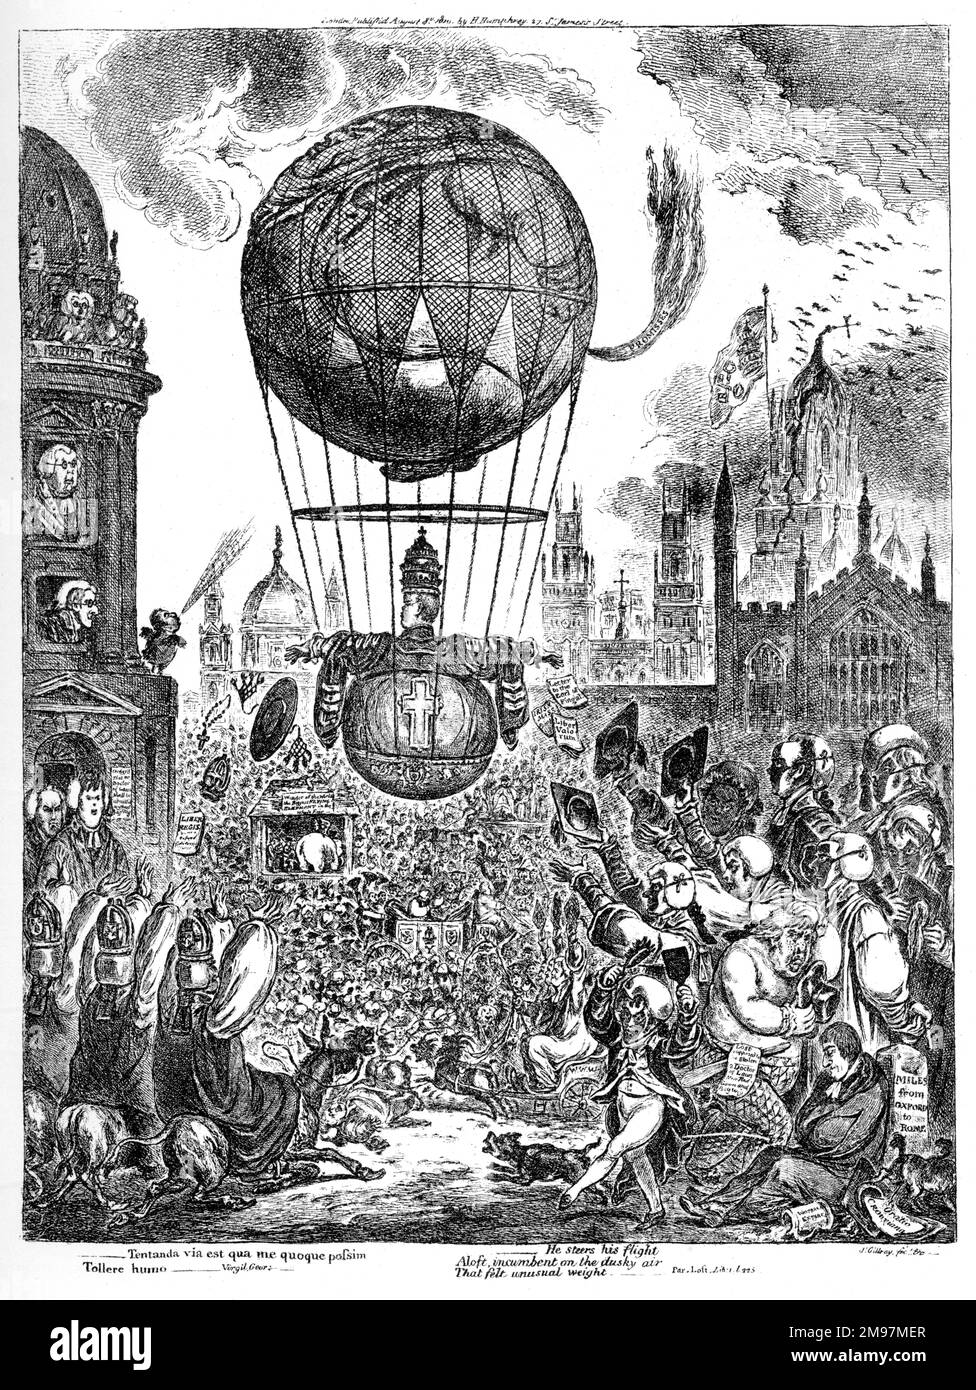 Cartoon, The Great Balloon, by James Gillray.  A satirical comment on the subject of Lord Grenville's installation as Chancellor of Oxford University. The balloon is depicted as a fat man with hot air (labelled Promises) escaping from behind. The installation (3 July 1810) followed a divisive election in which Lord Eldon opposed Lord Grenville on political and religious grounds. Opponents like Gillray saw Grenville’s installation as a triumph for Catholic Emancipation. Faces in the crowd include political figures: Buckingham, Stafford, M.A. Taylor, Erskine, Tierney, Holland, Grey, Sidmouth, Stock Photo